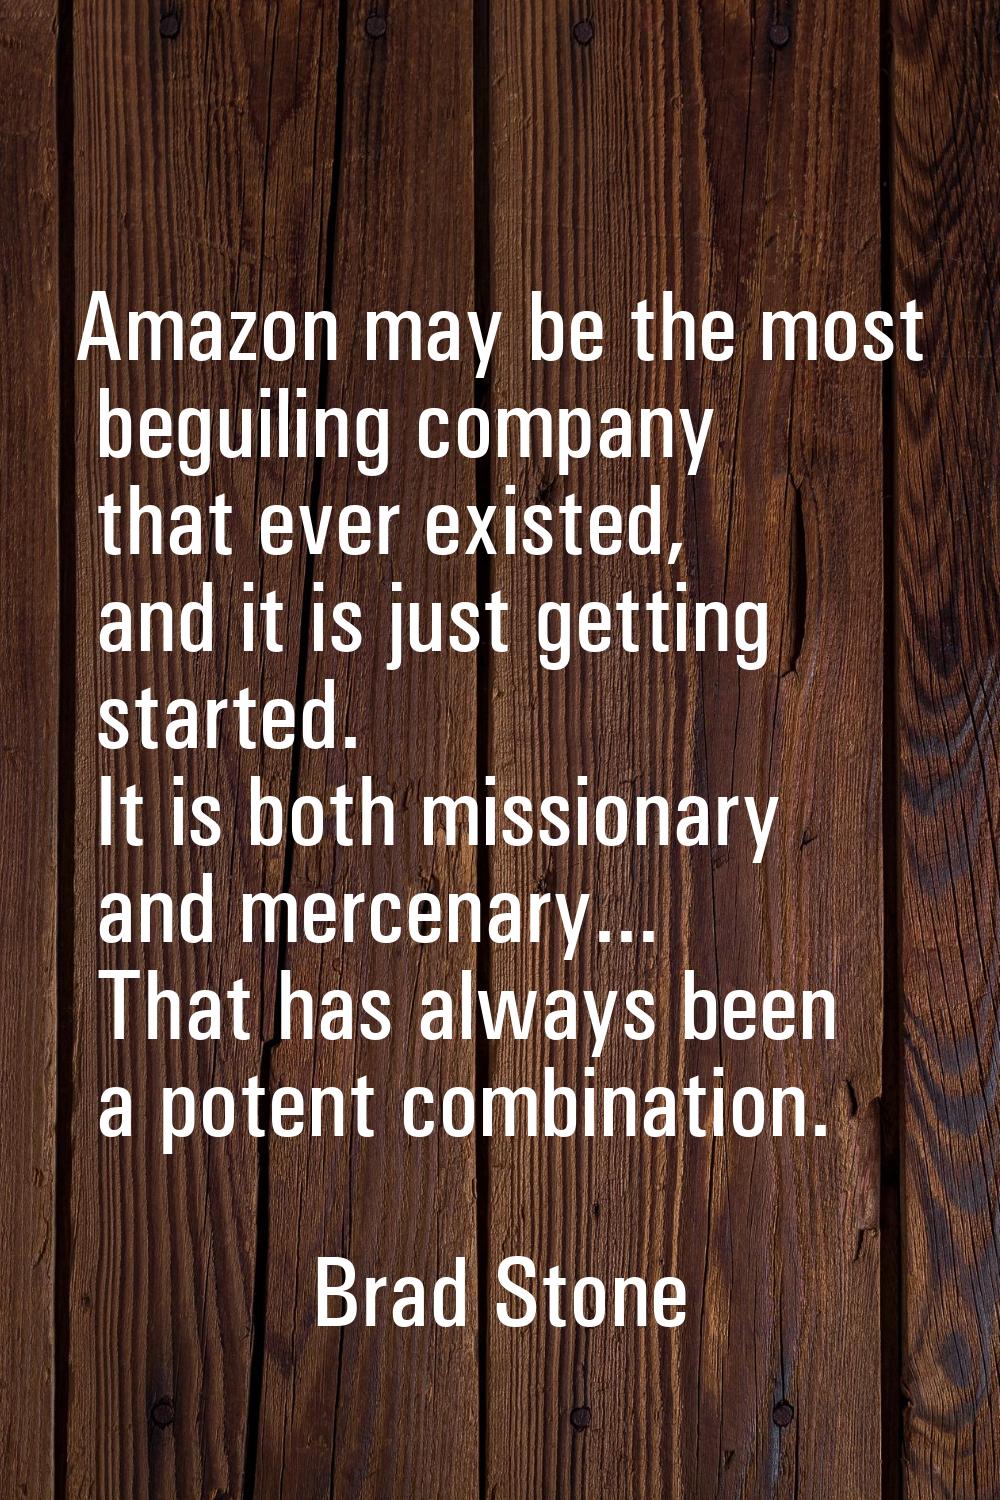 Amazon may be the most beguiling company that ever existed, and it is just getting started. It is b